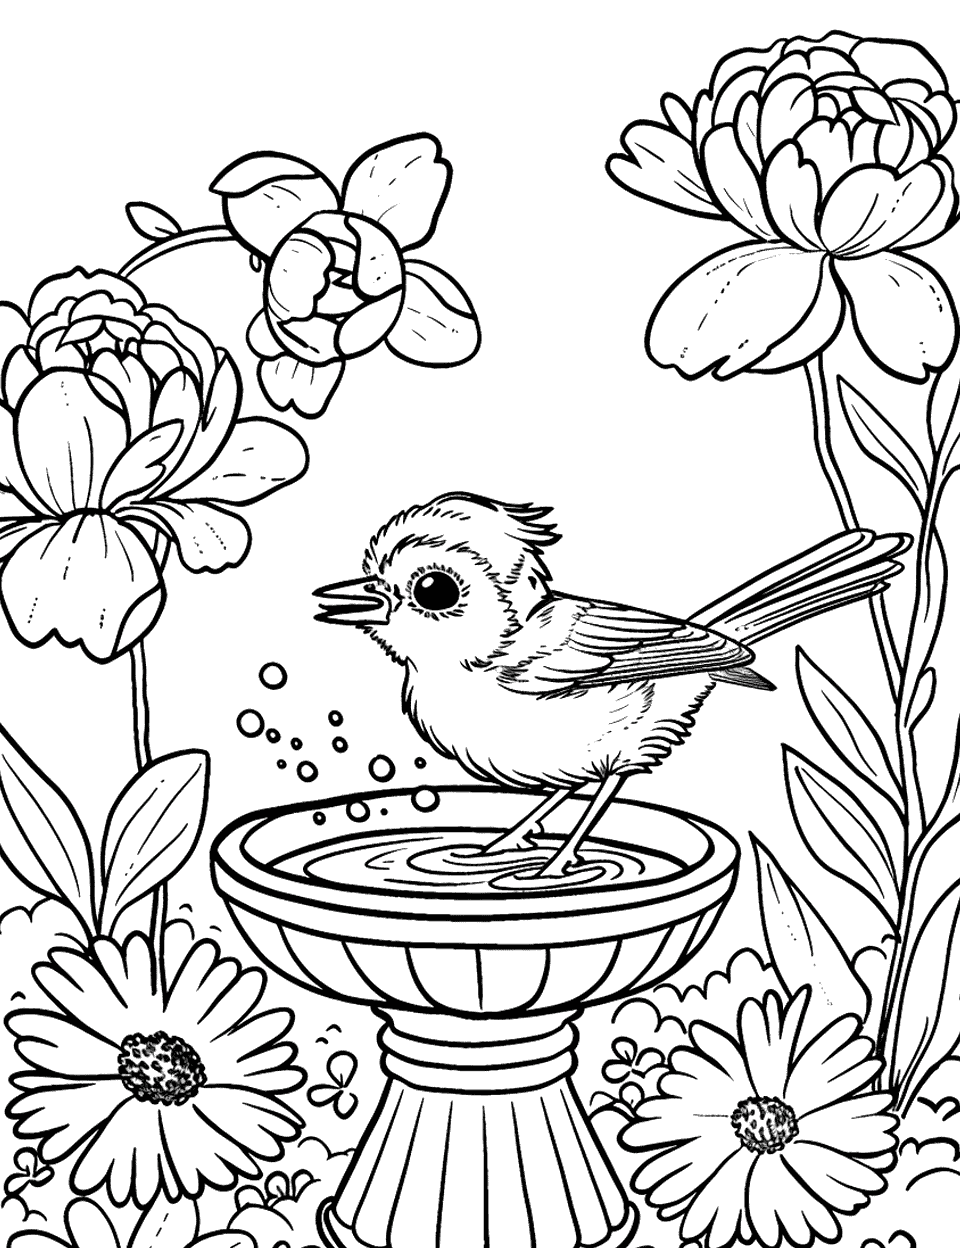 Bird Bath Gathering Garden Coloring Page - A single robin splashing in a bird bath surrounded by peonies and marigolds.